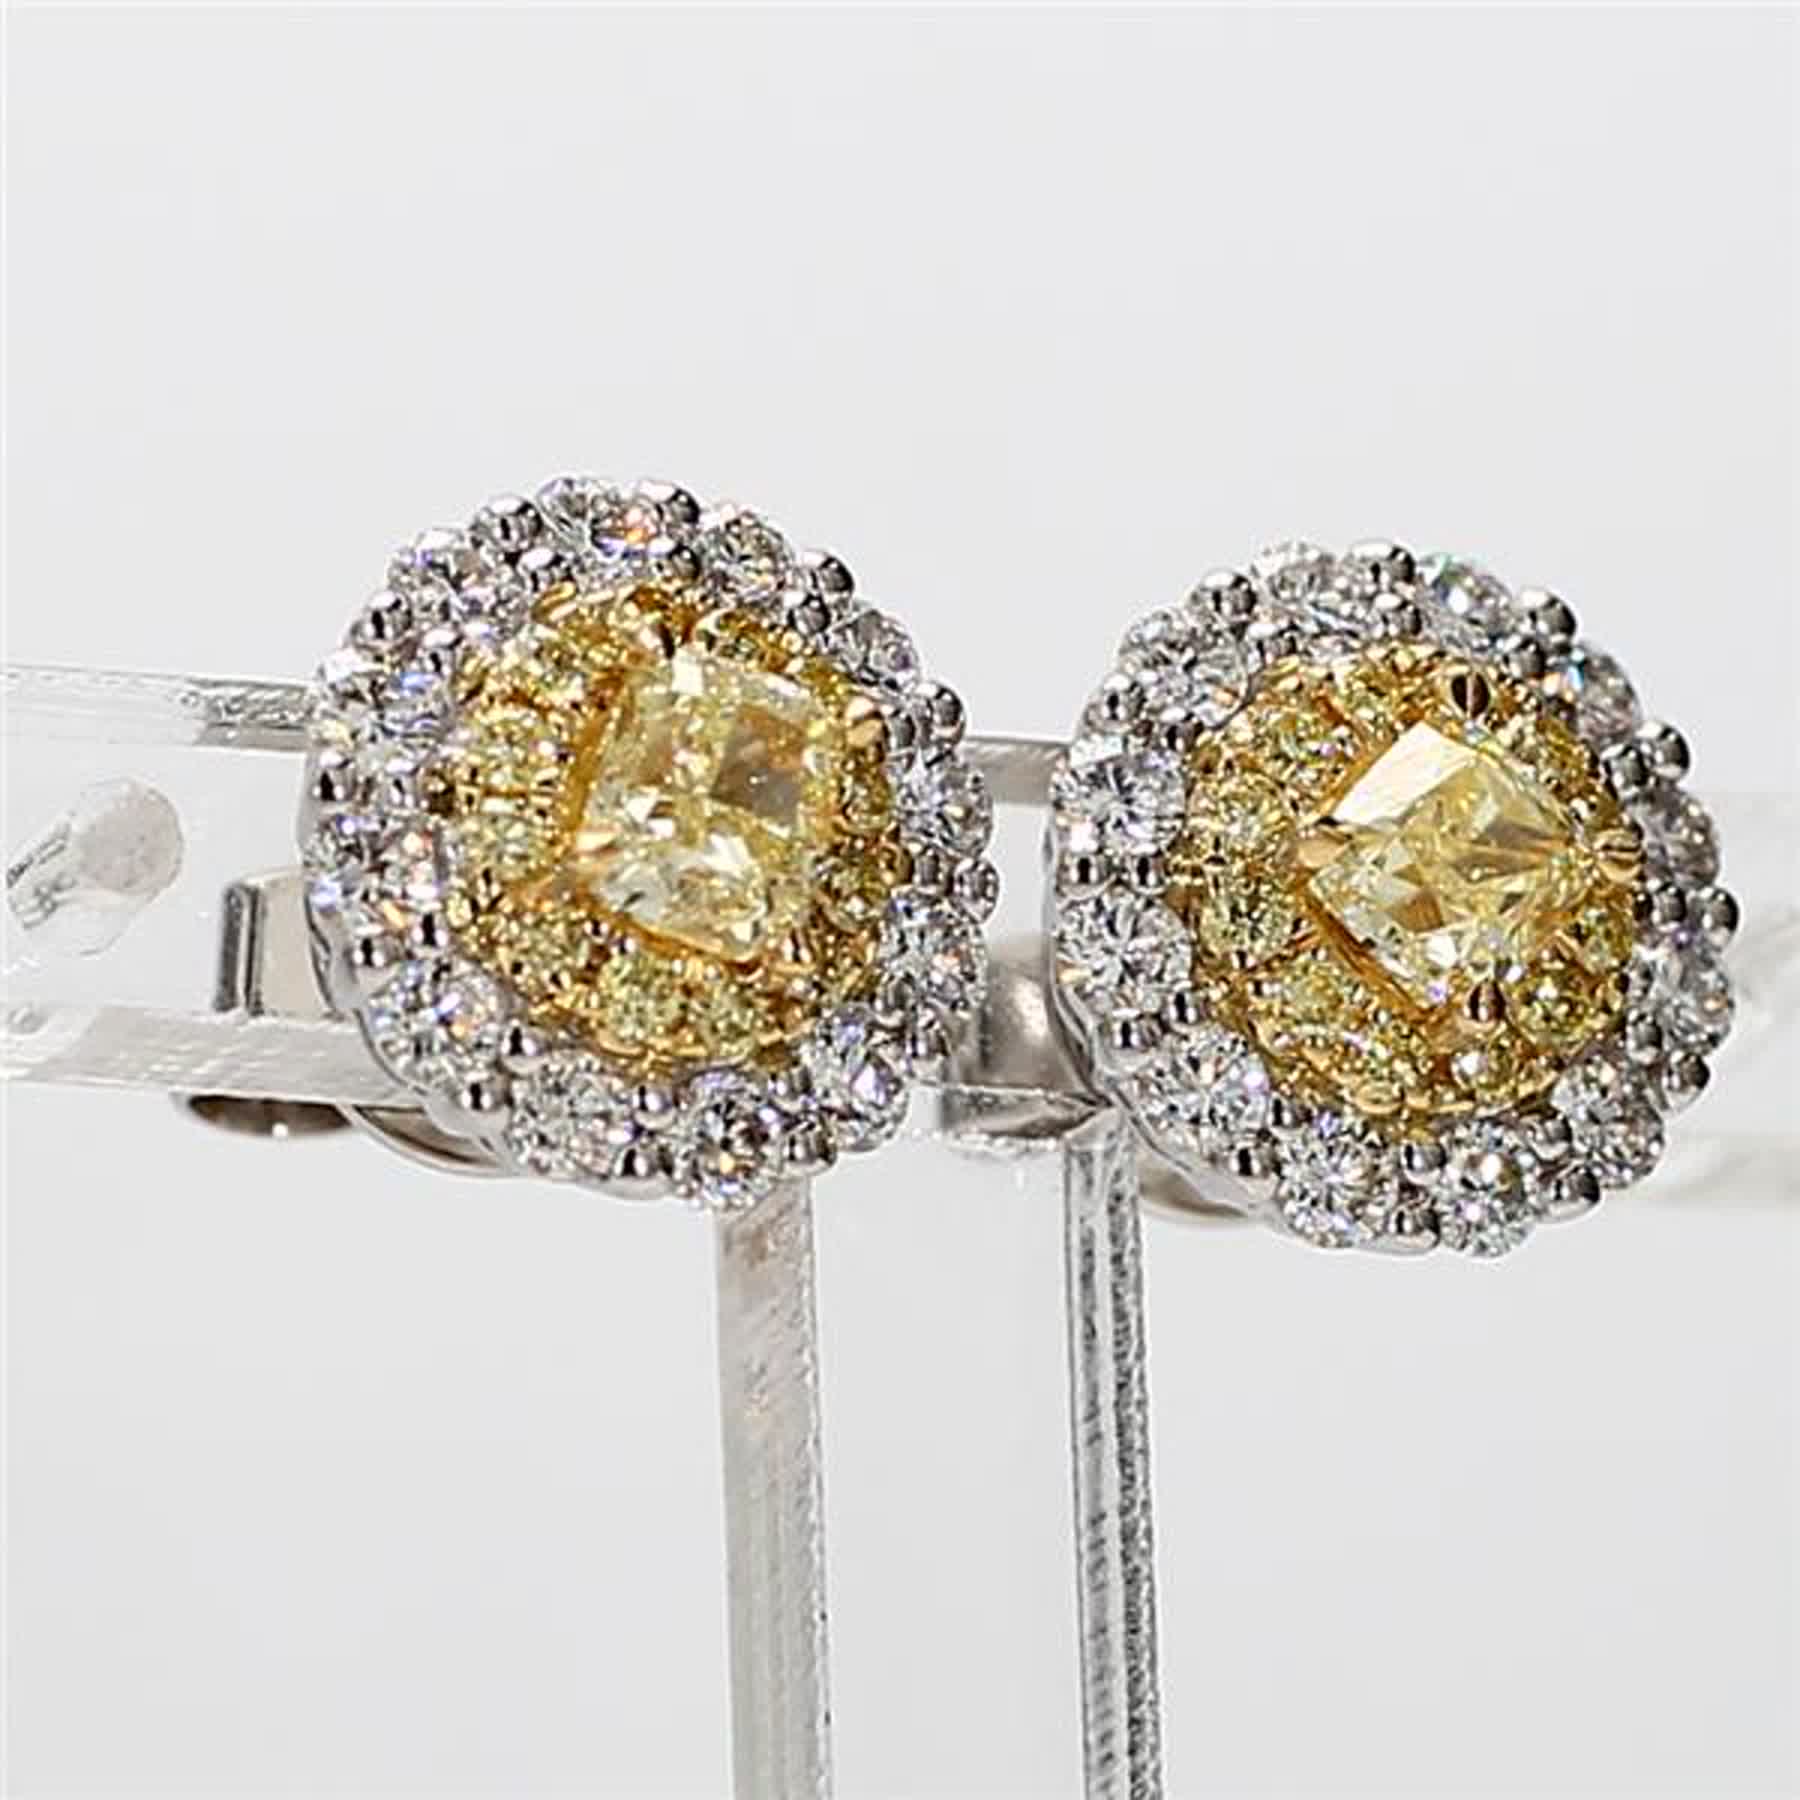 Natural Yellow Cushion and White Diamond 1.39 Carat TW Gold Stud Earrings